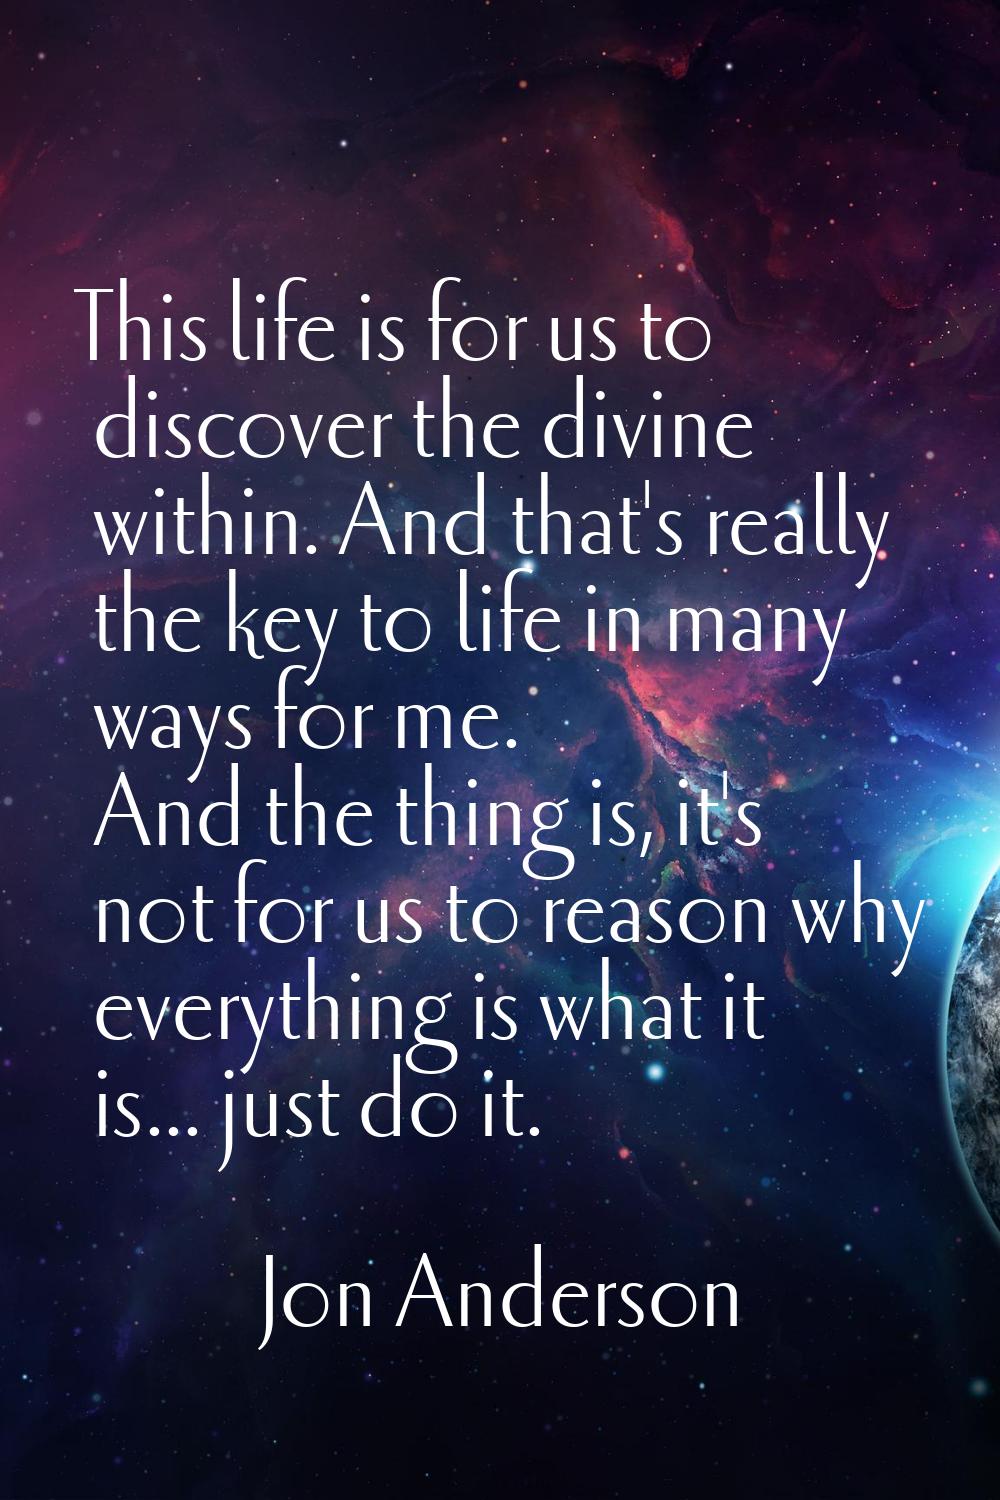 This life is for us to discover the divine within. And that's really the key to life in many ways f